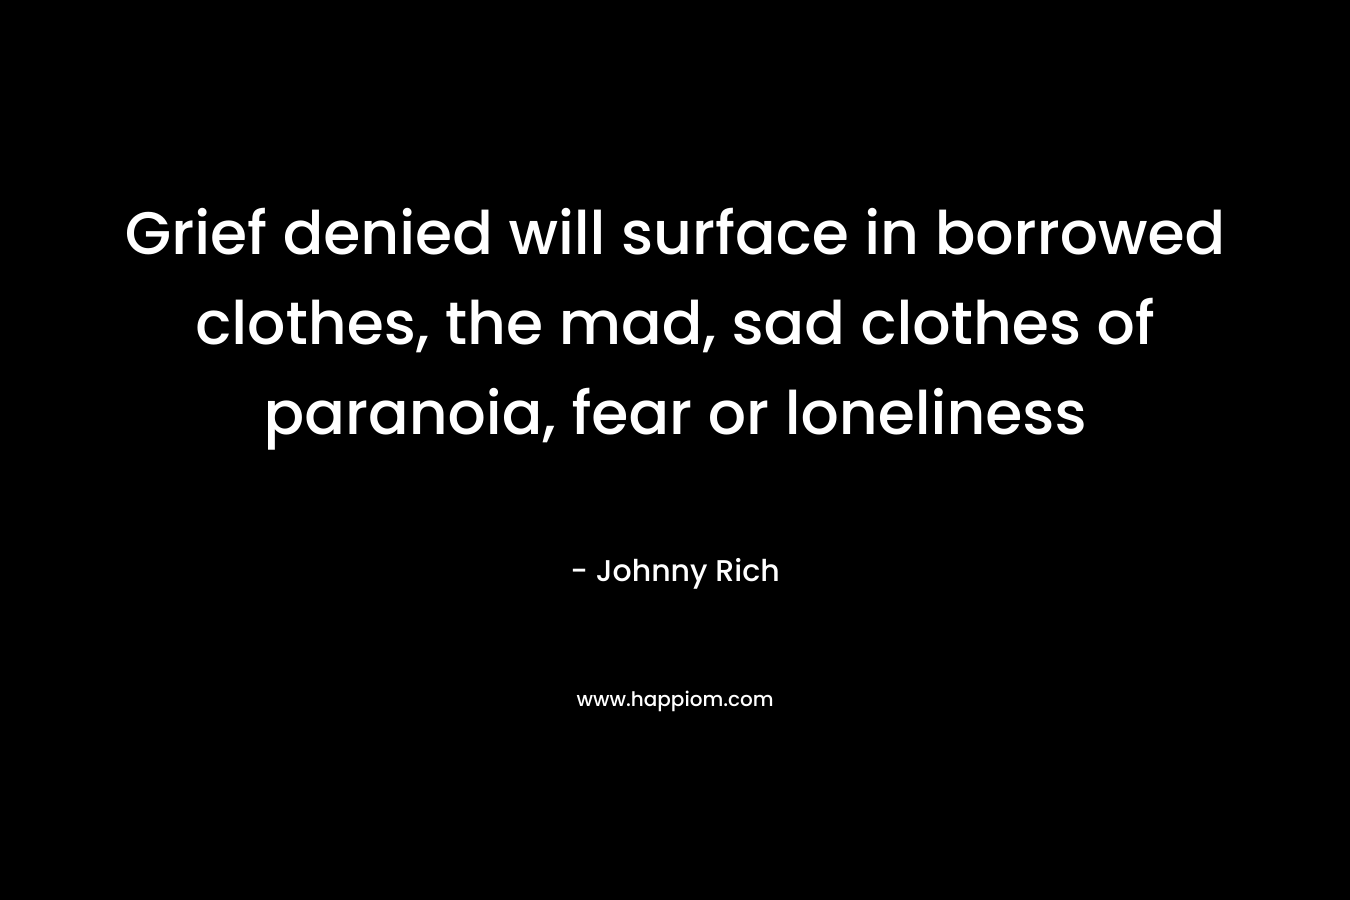 Grief denied will surface in borrowed clothes, the mad, sad clothes of paranoia, fear or loneliness